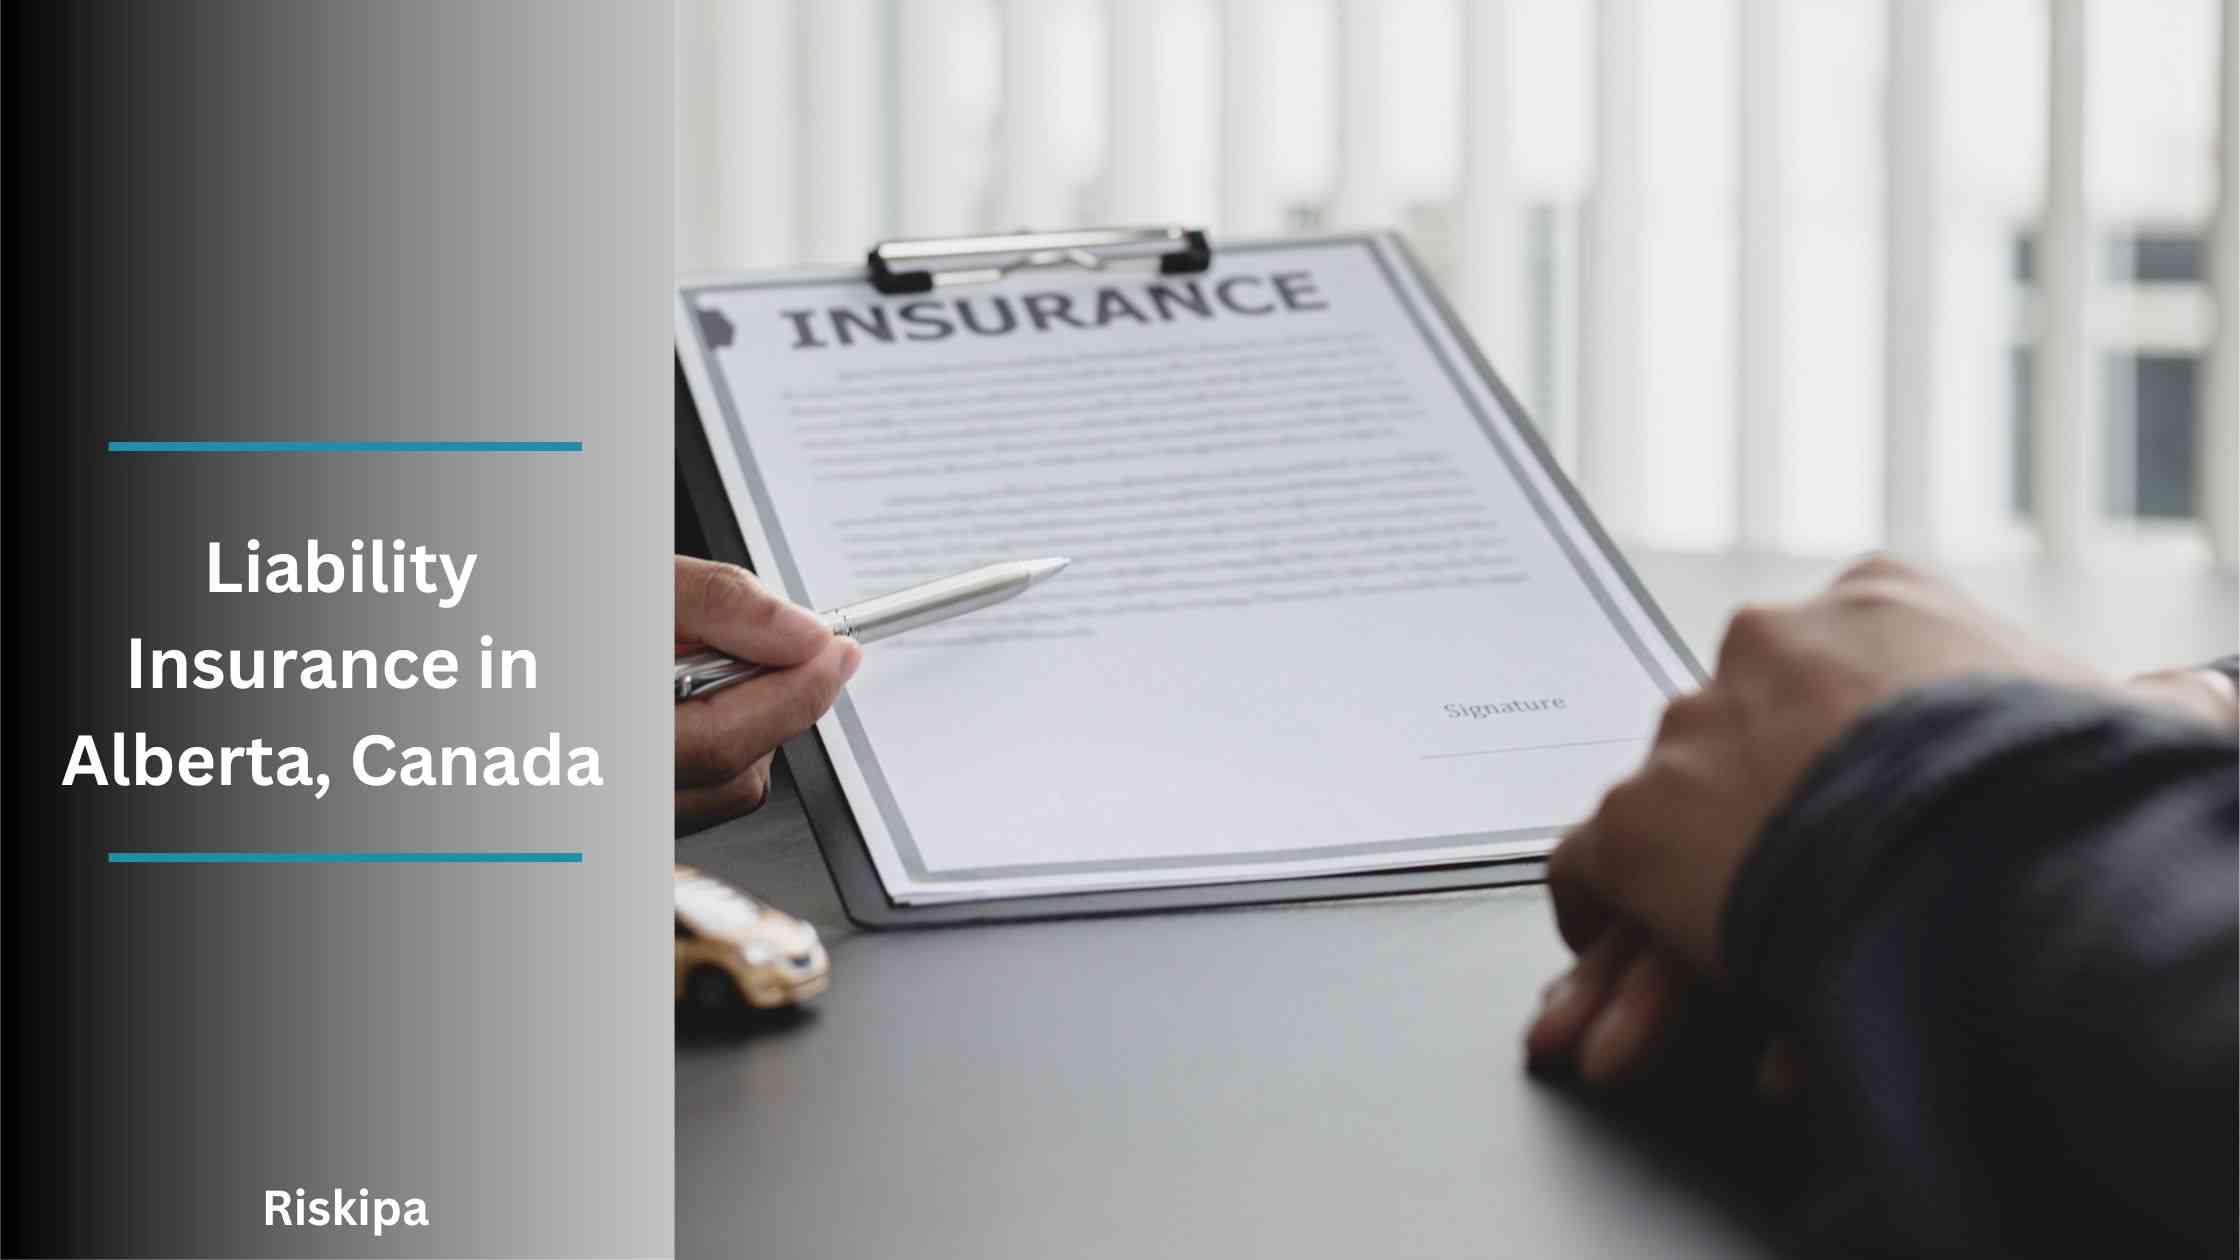 Types of Liability Insurance in Alberta, Canada